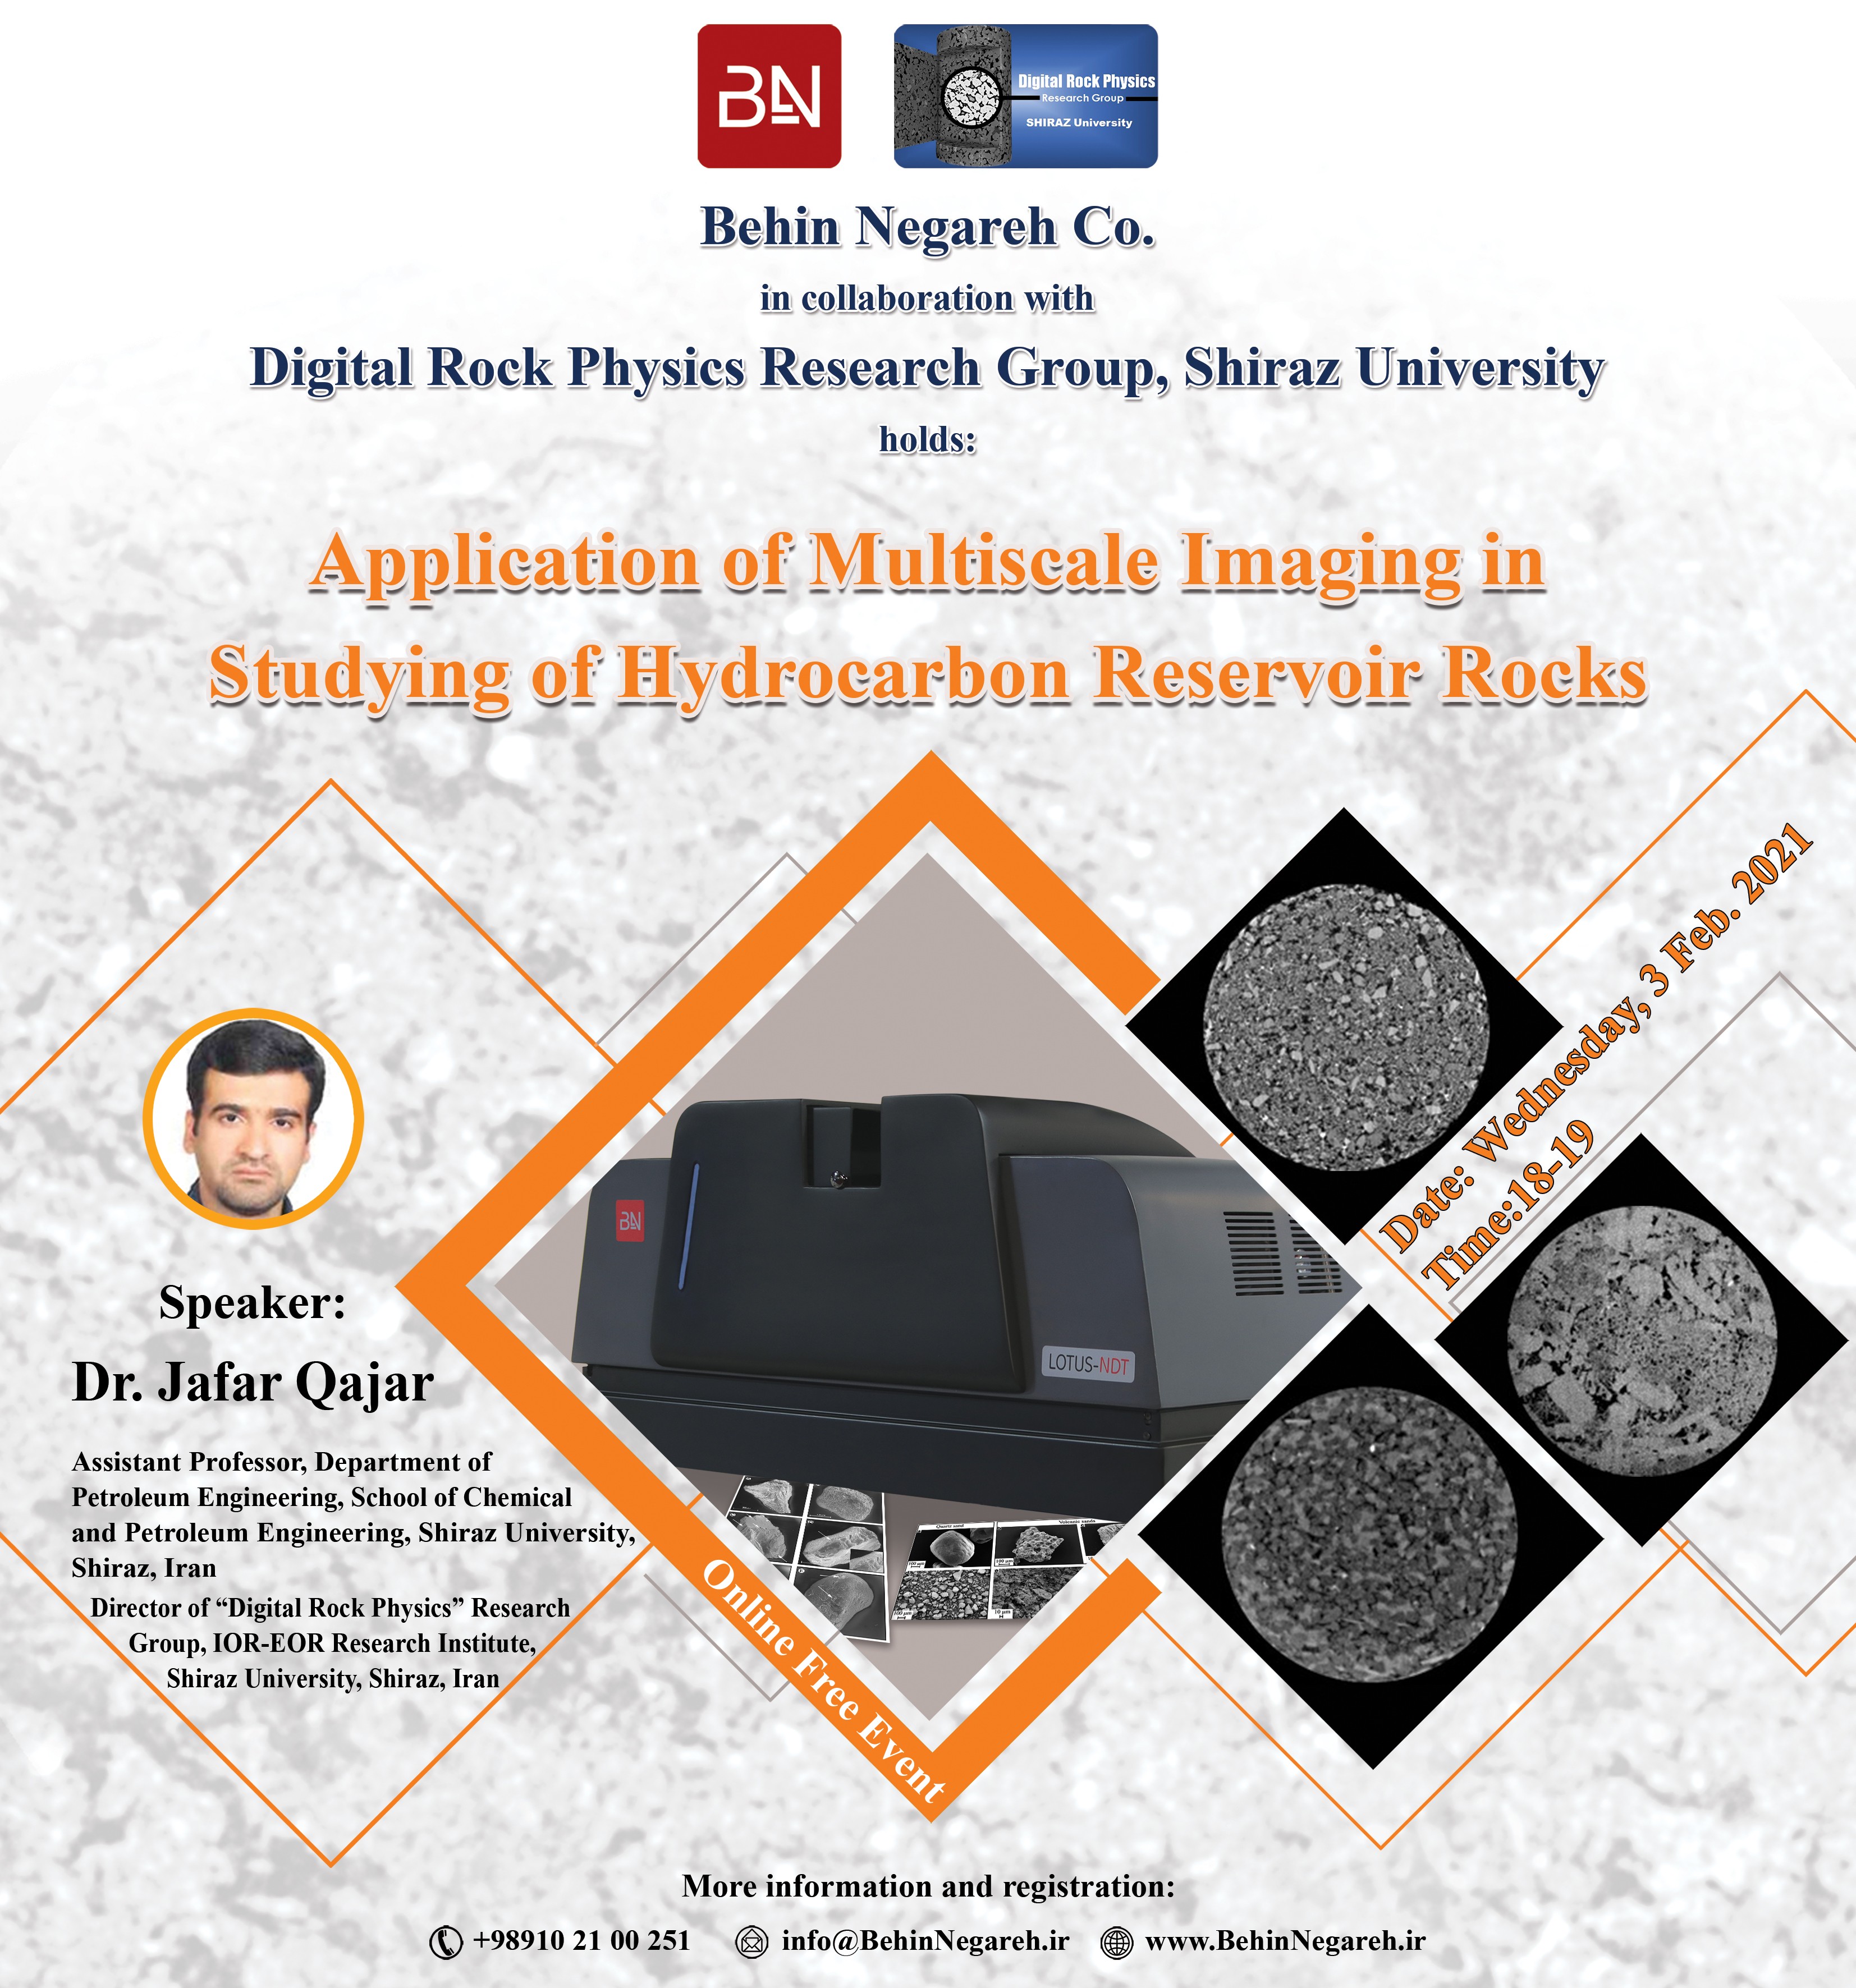 Application of Multi-Scale Imaging in The Study of Hydrocarbon Reservoir Rocks